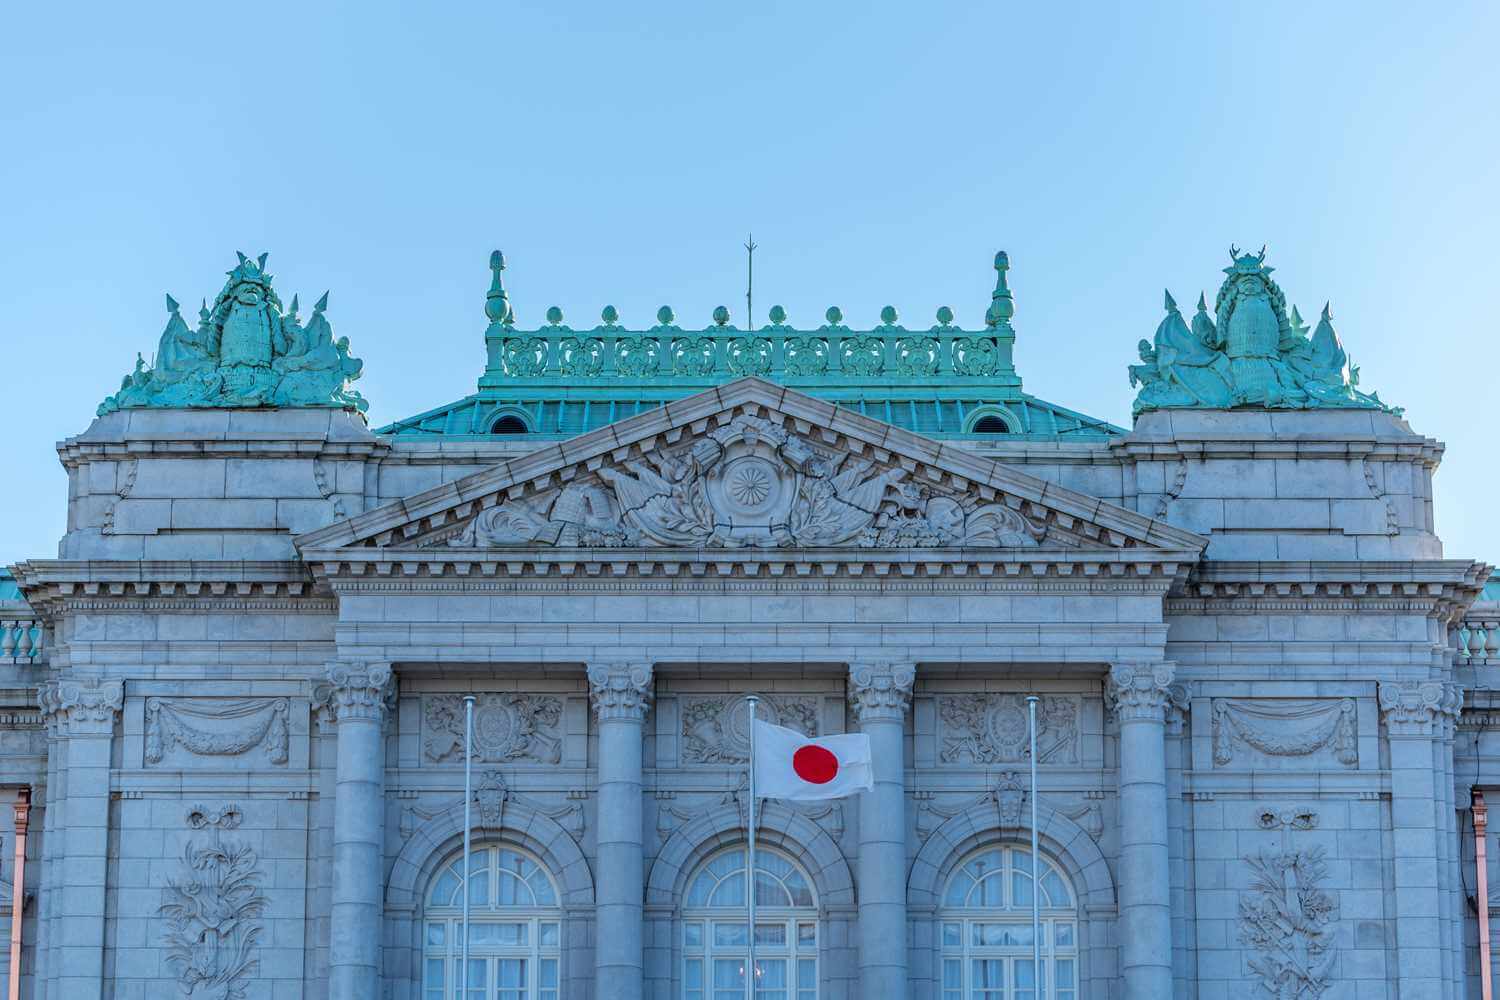 The State Guest House (Akasaka Palace) in Tokyo = Shutterstock